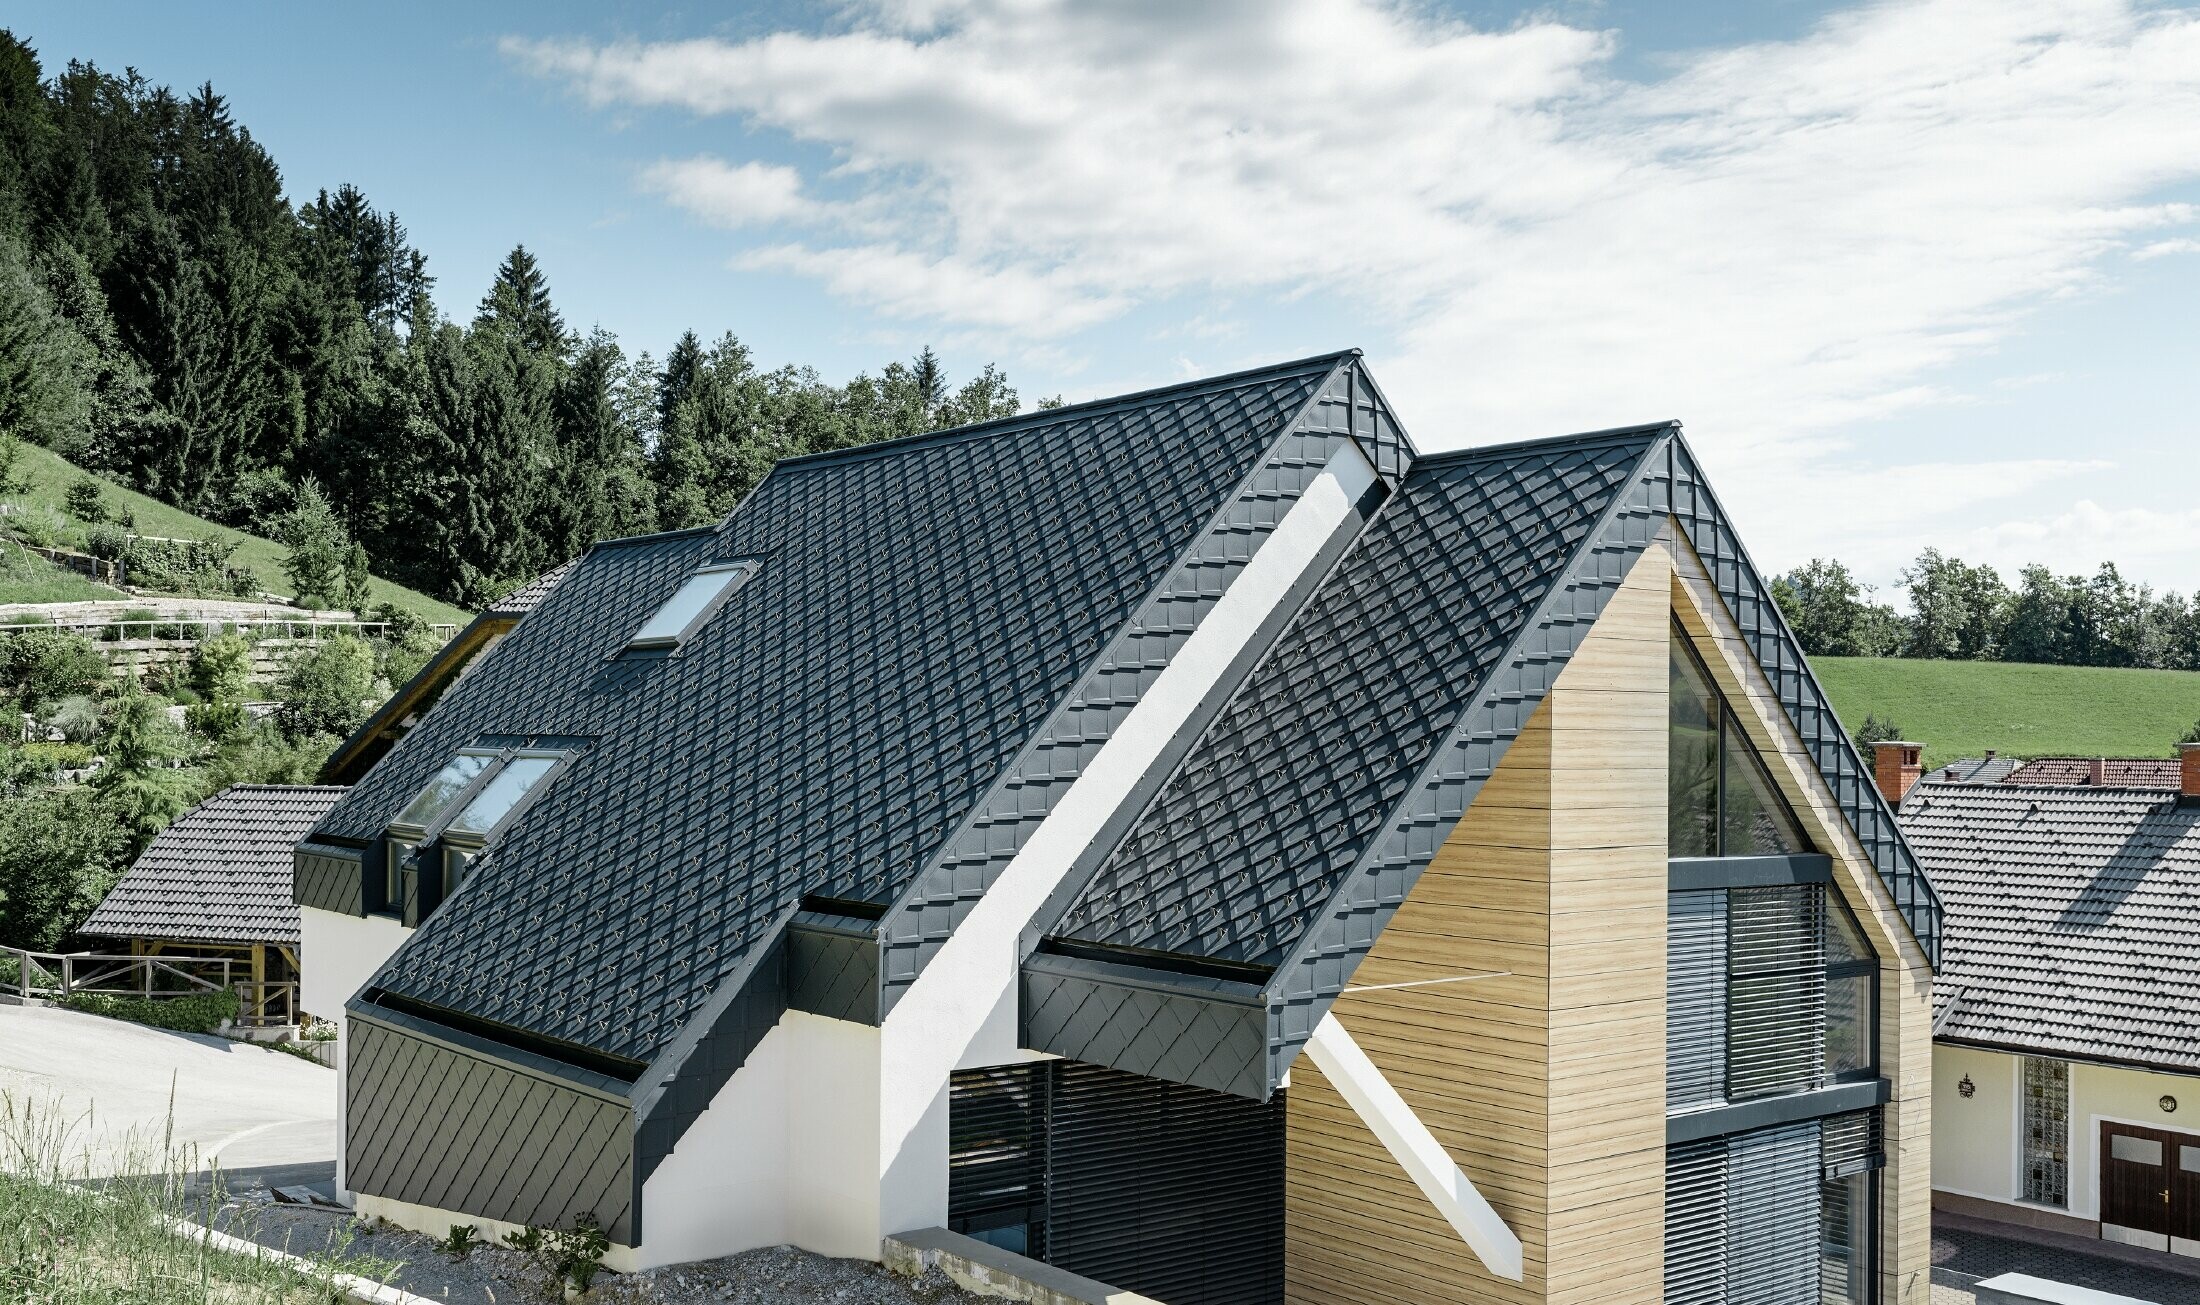 Detached house with gable roof without eaves with a wooden-look façade and an anthracite aluminium roof